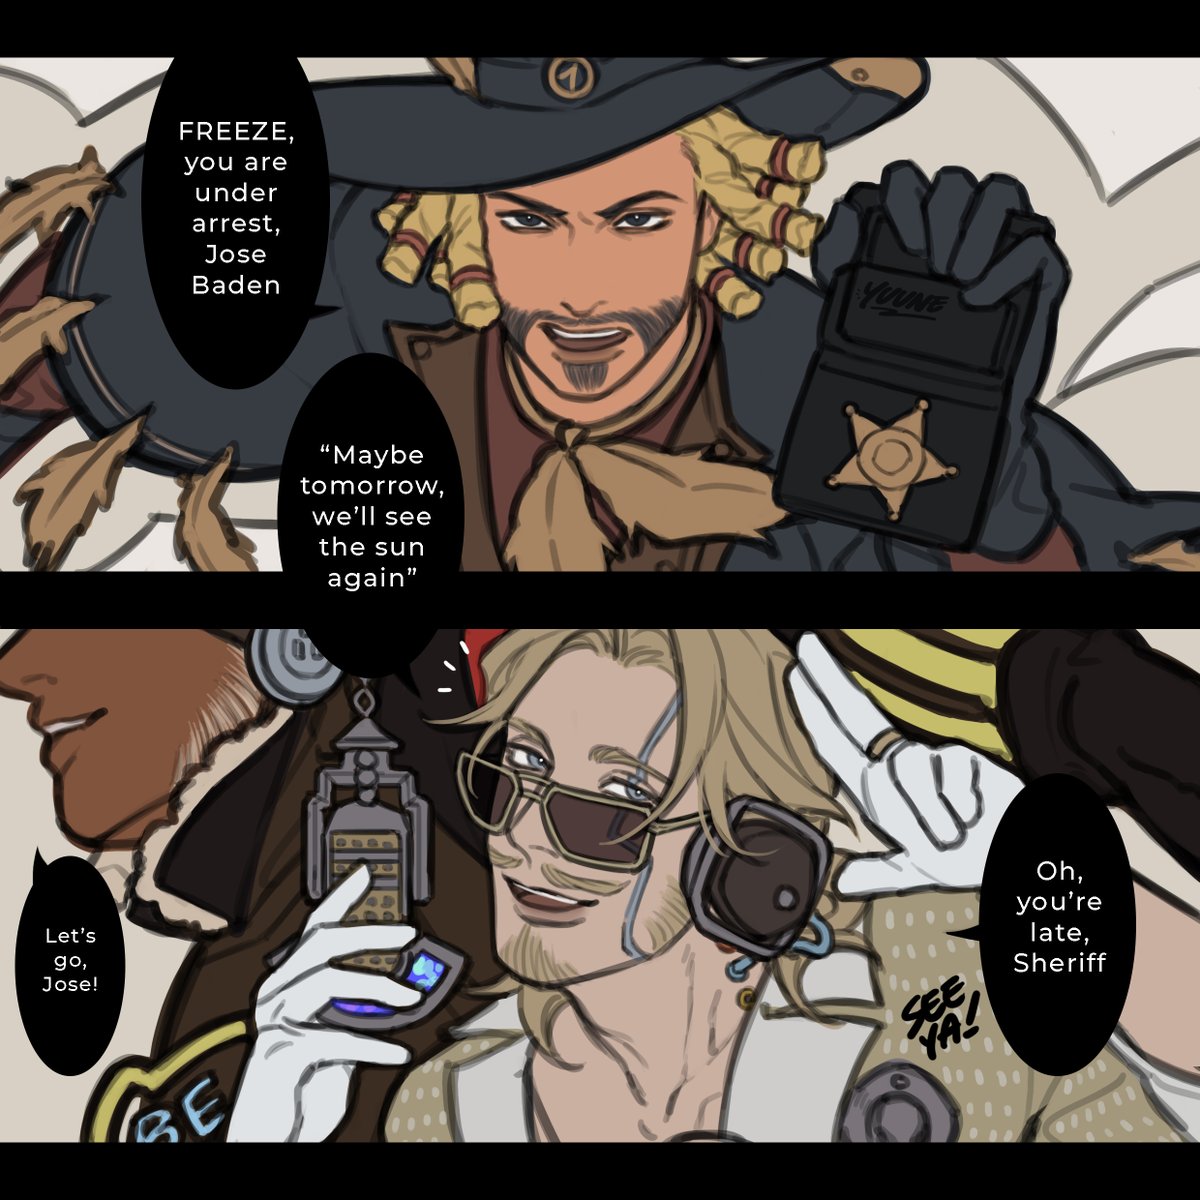 Iron Hat Sheriff has been chasing Pirate Radio for months, but Jose is always few steps ahead from him

#IdentityV #KevinAlonso #JoseBaden #WilliamEllis